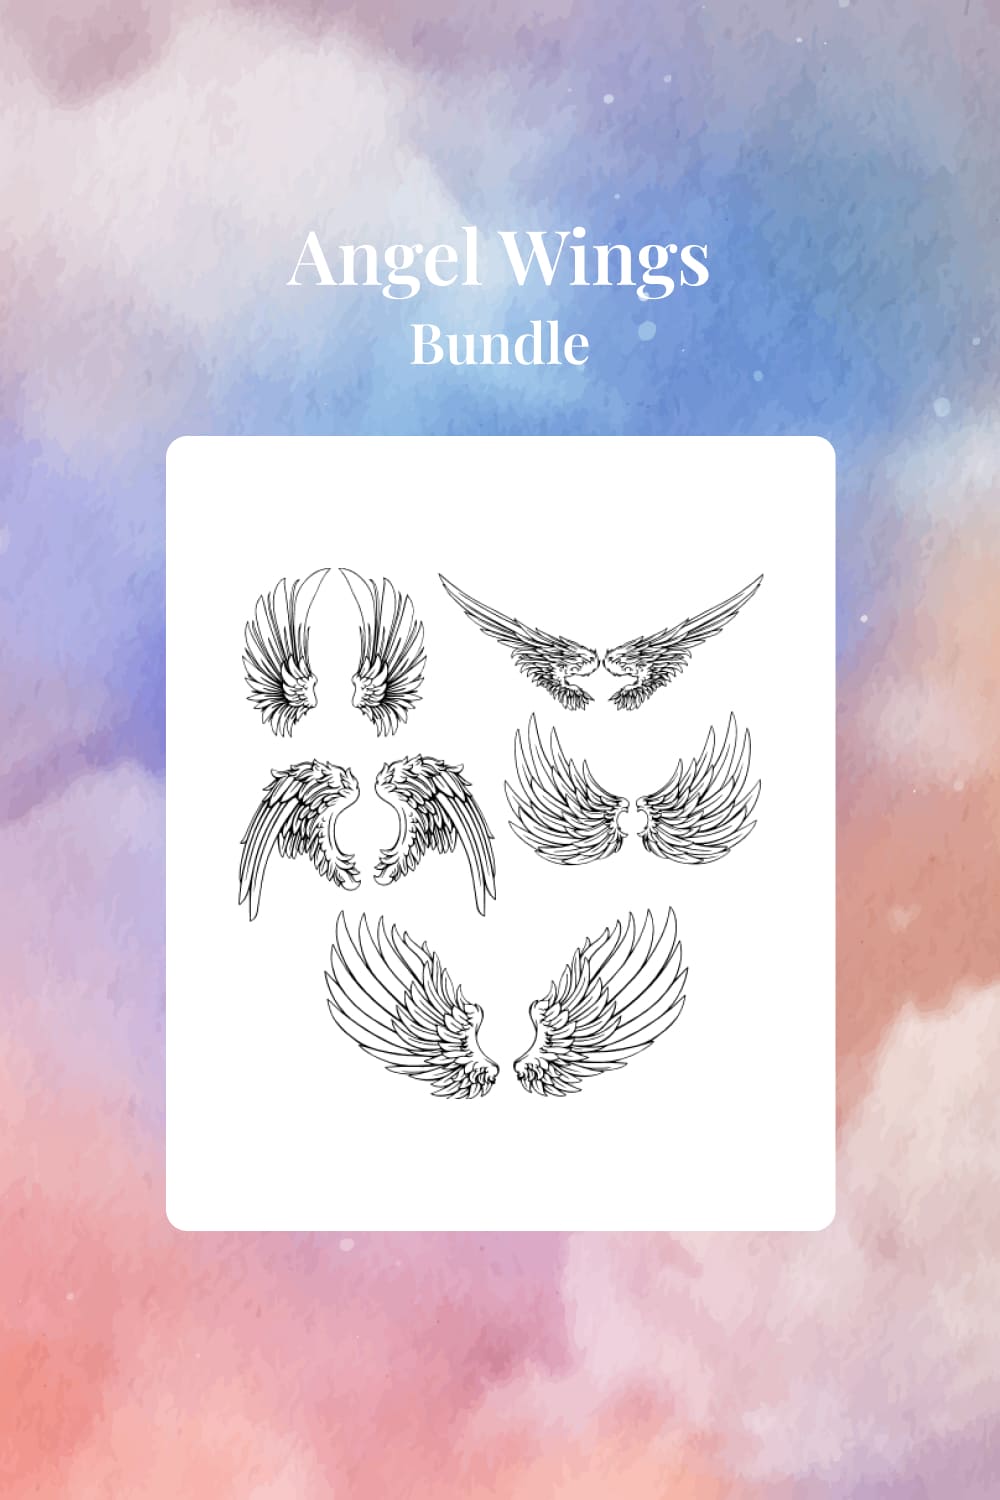 Collage of Image of angel wings with detailed drawing.